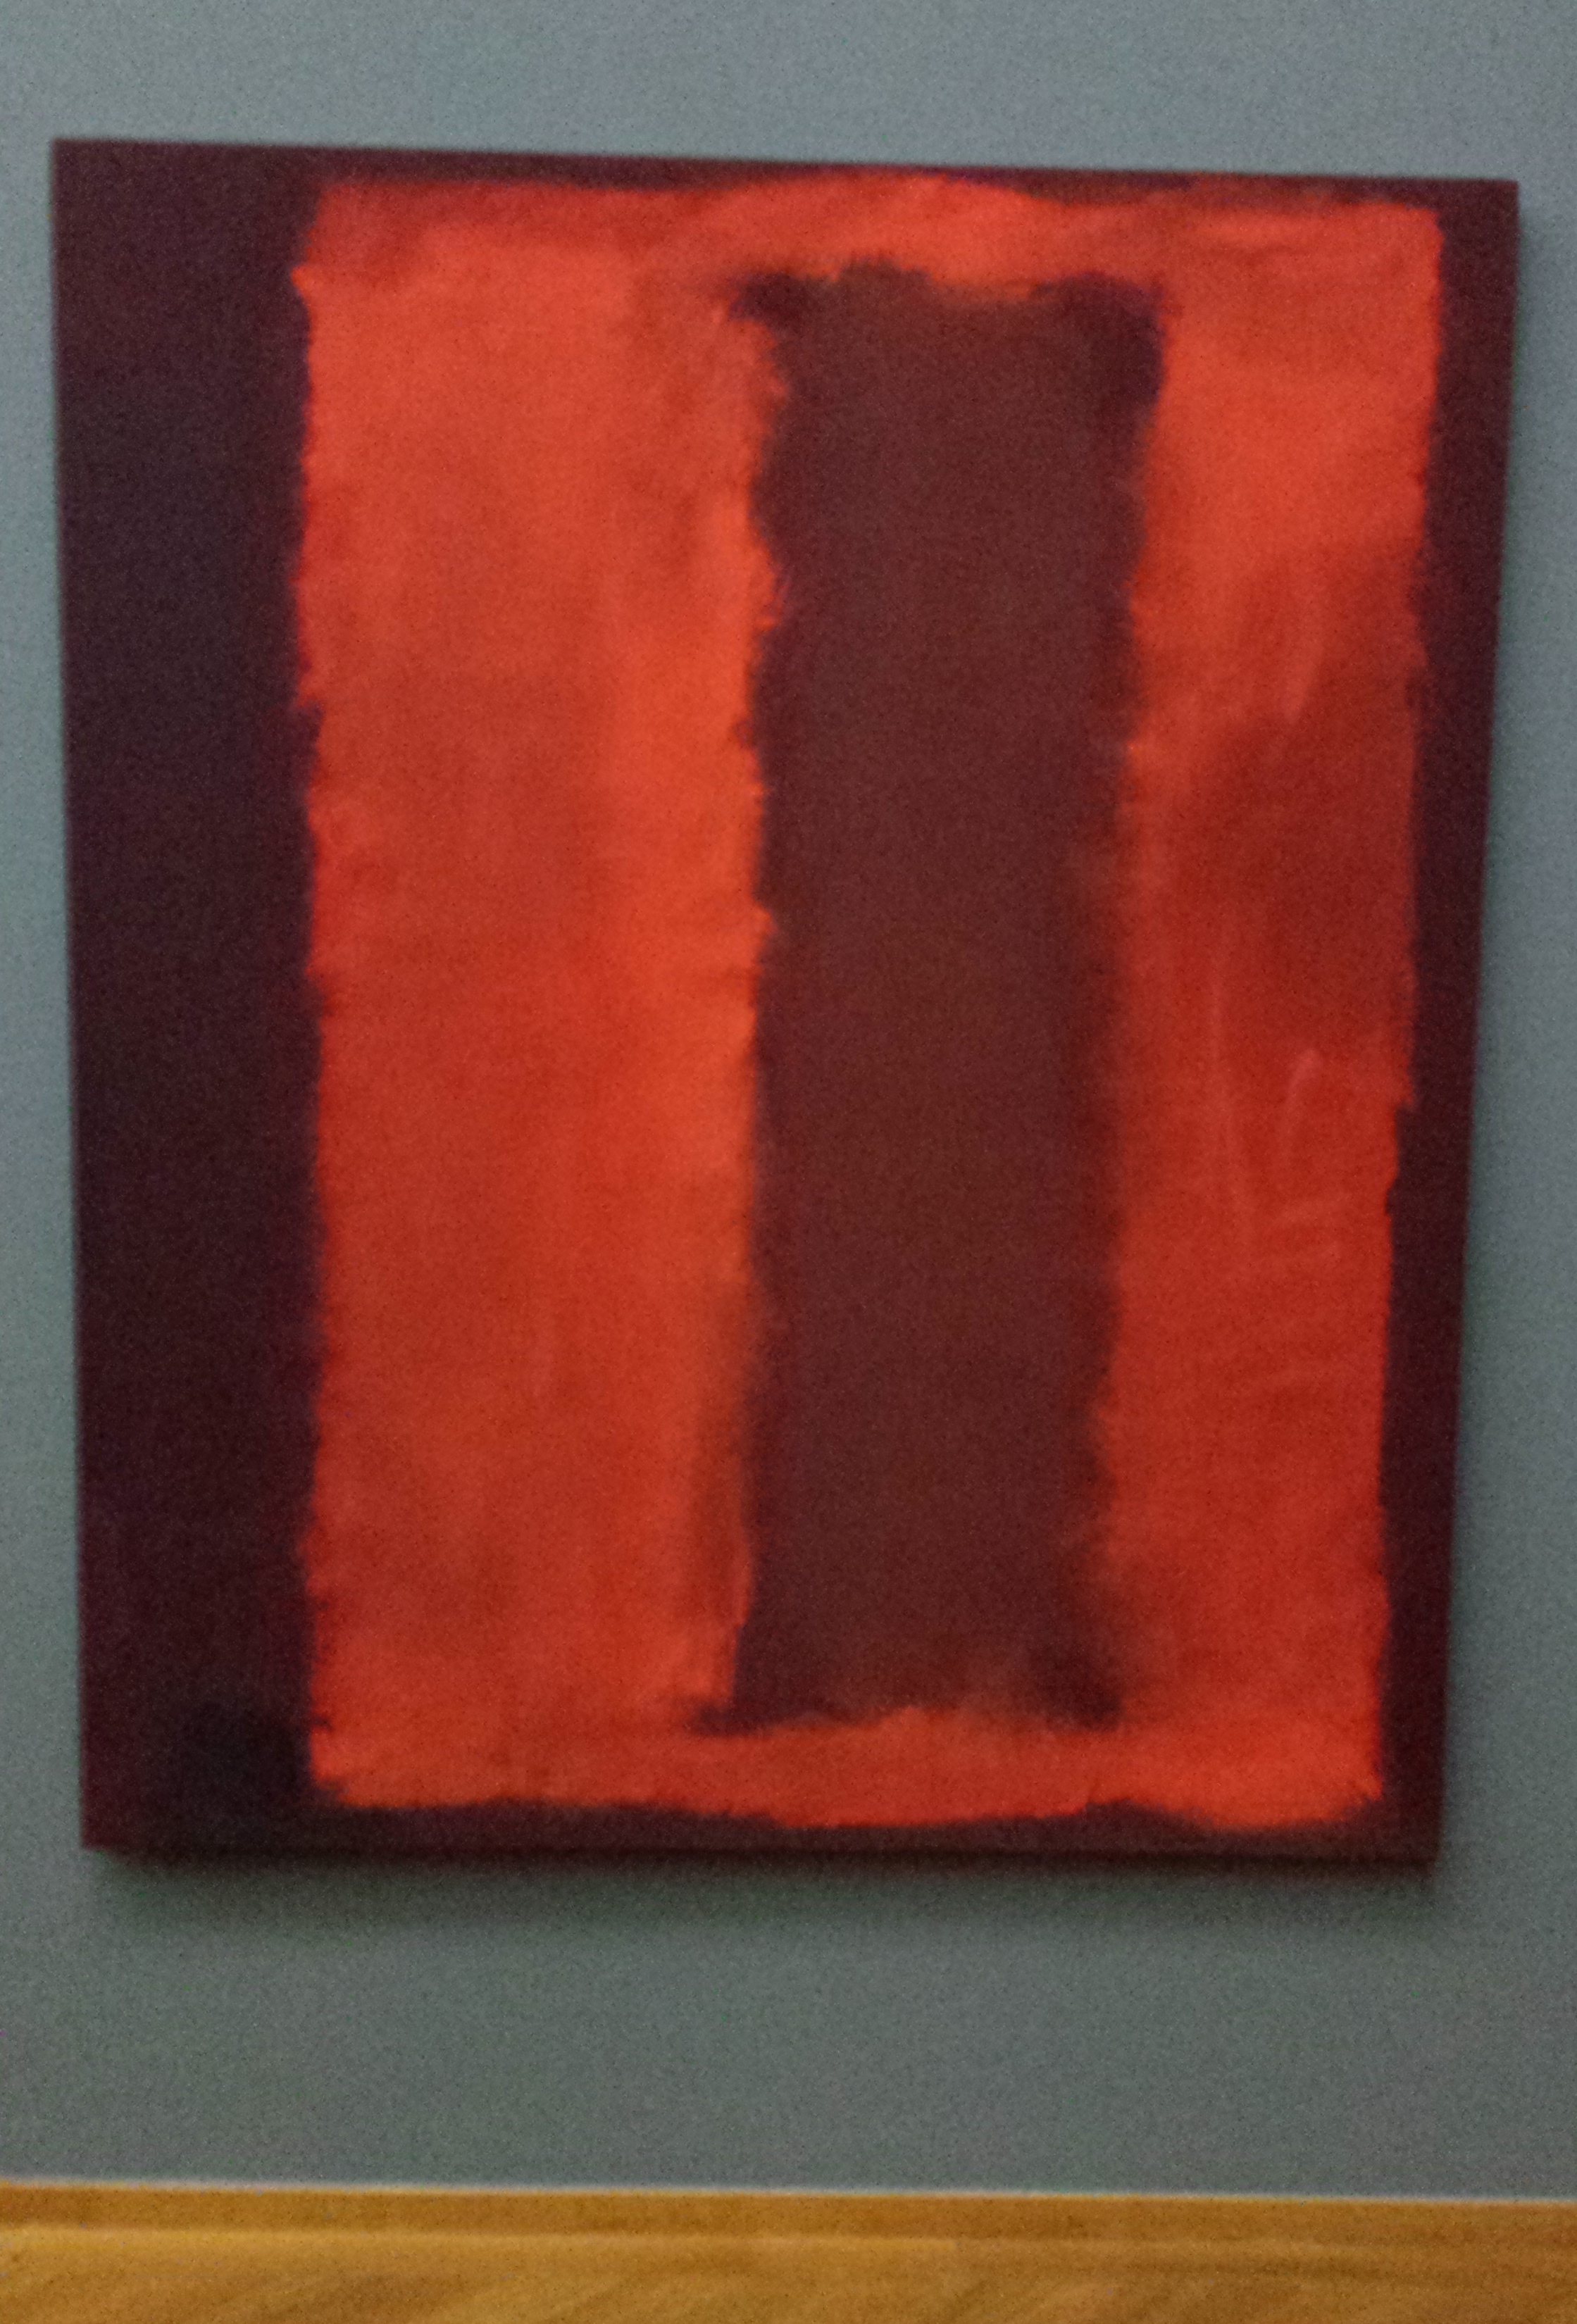 Painting with upright surfaces in red and brown tones